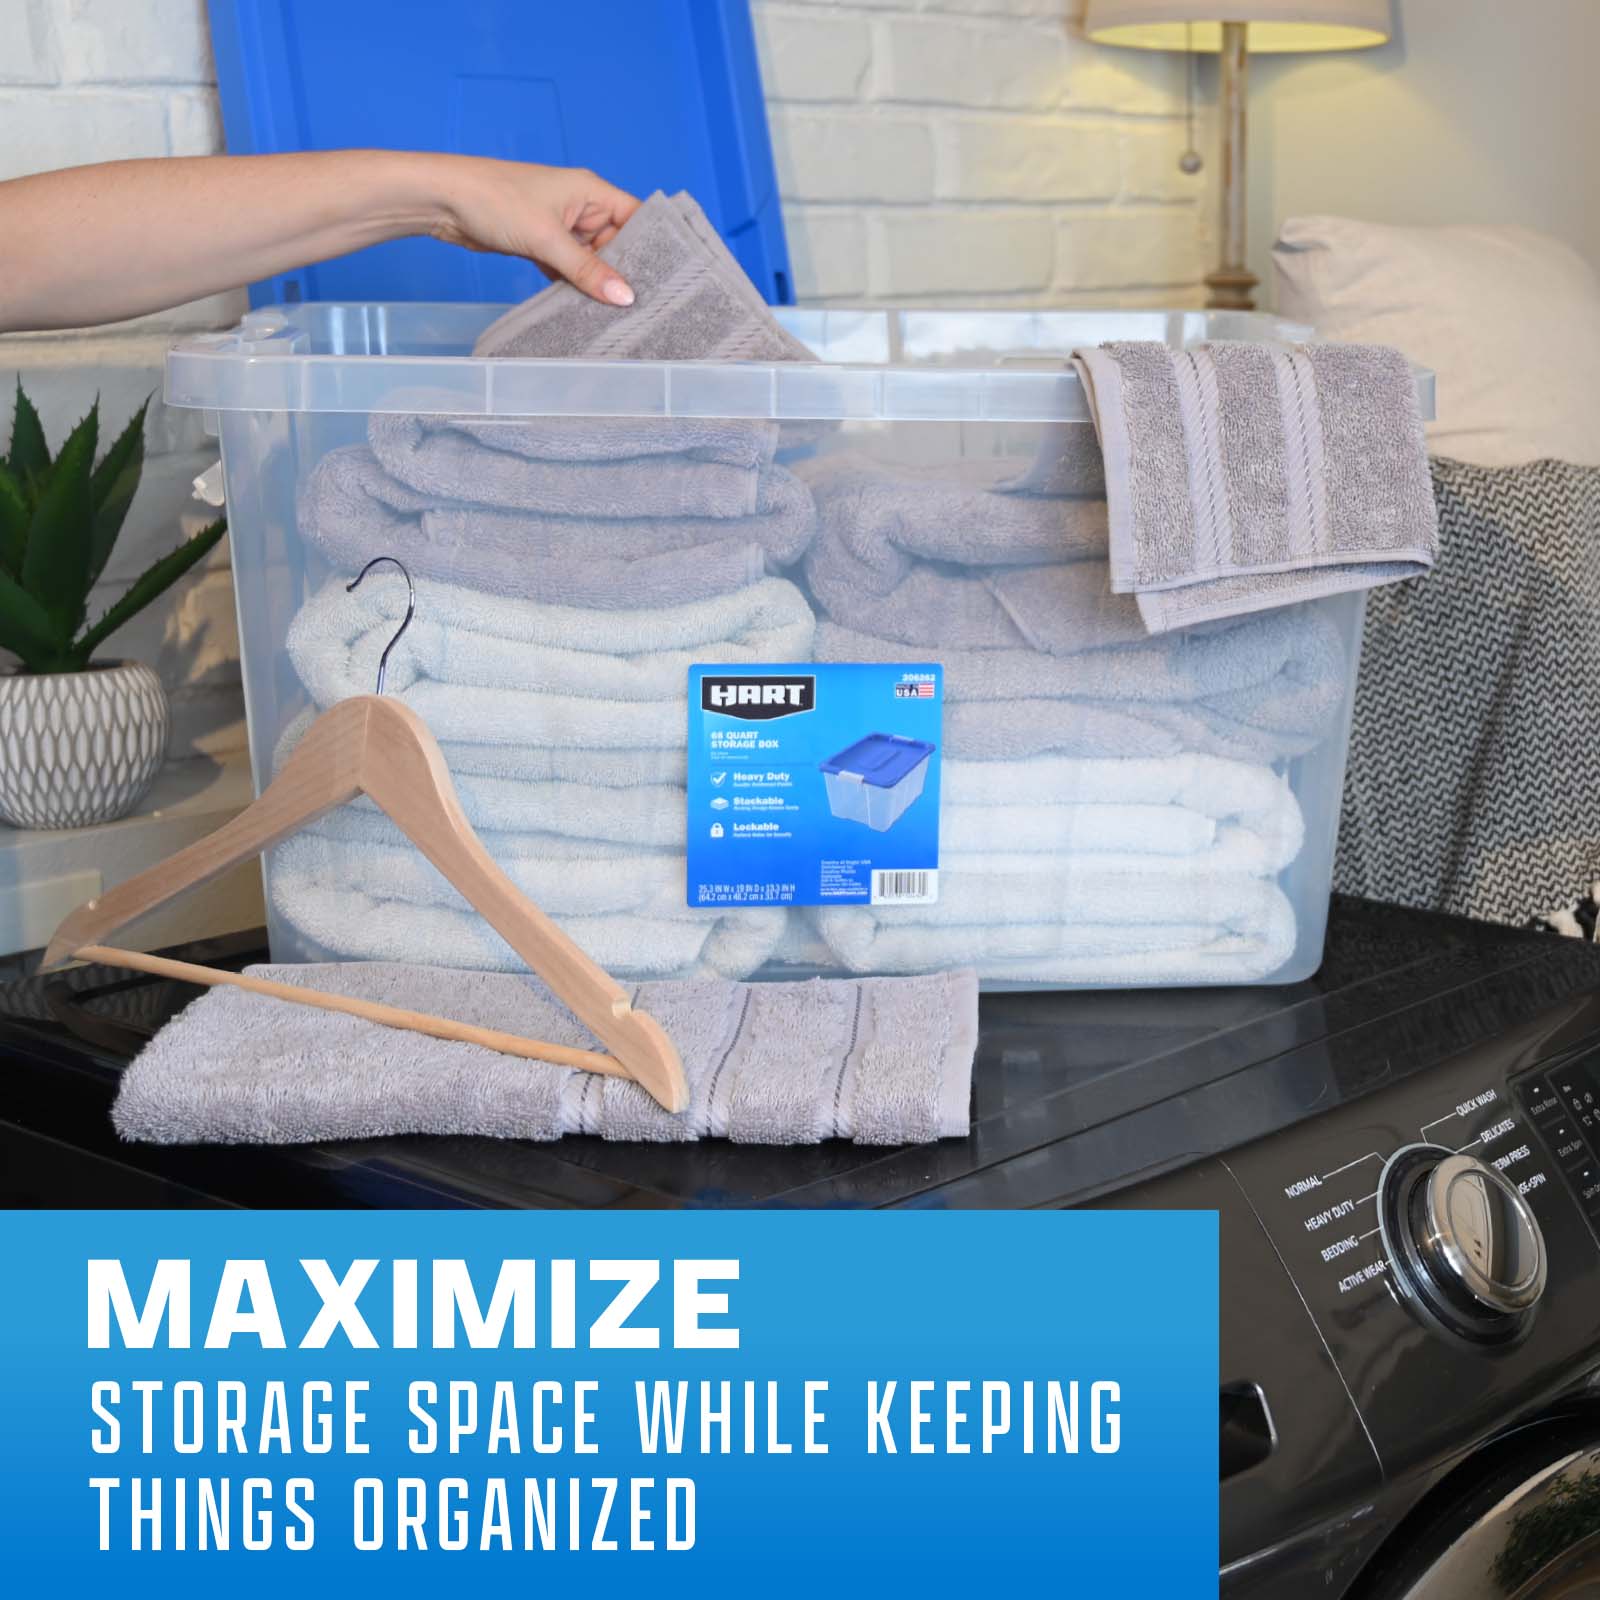 Maximize storage space while keeping things organized